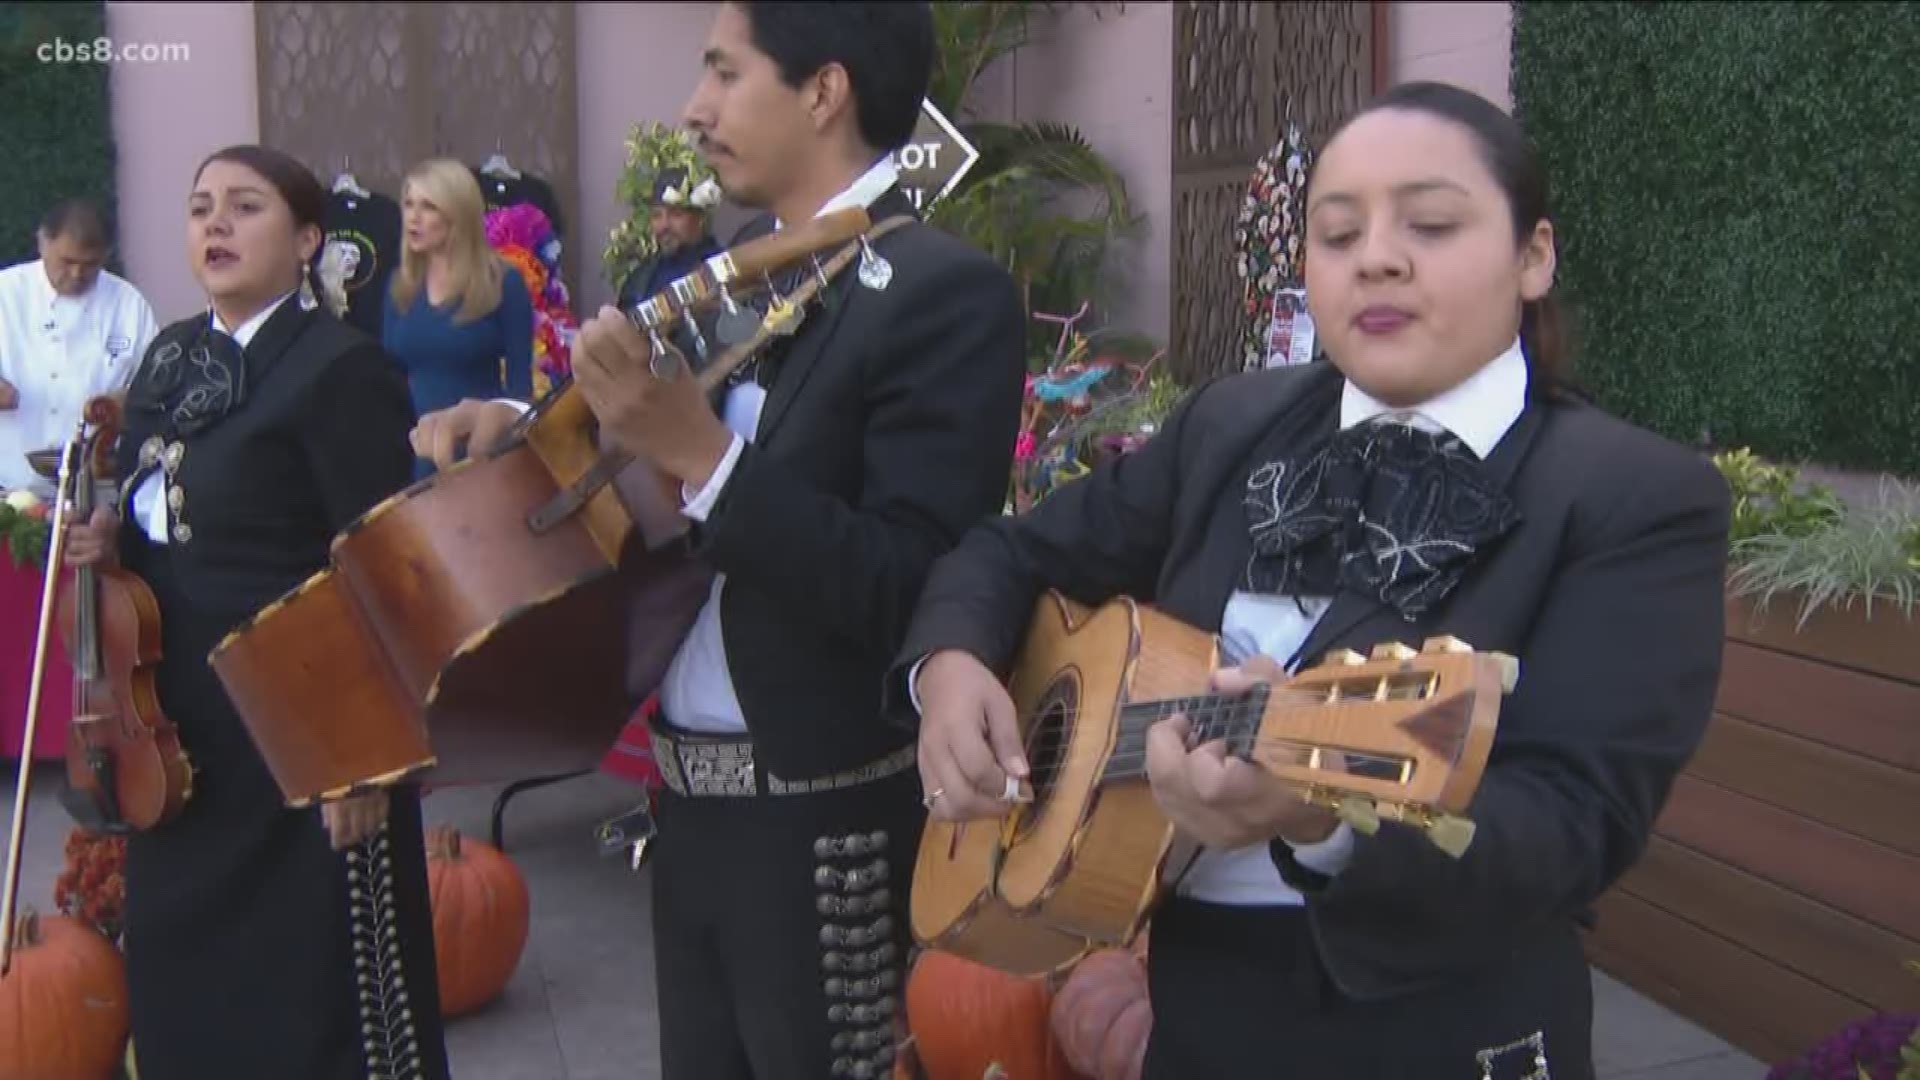 Unlike Halloween, which is about horror, Día de los Muertos is about family.